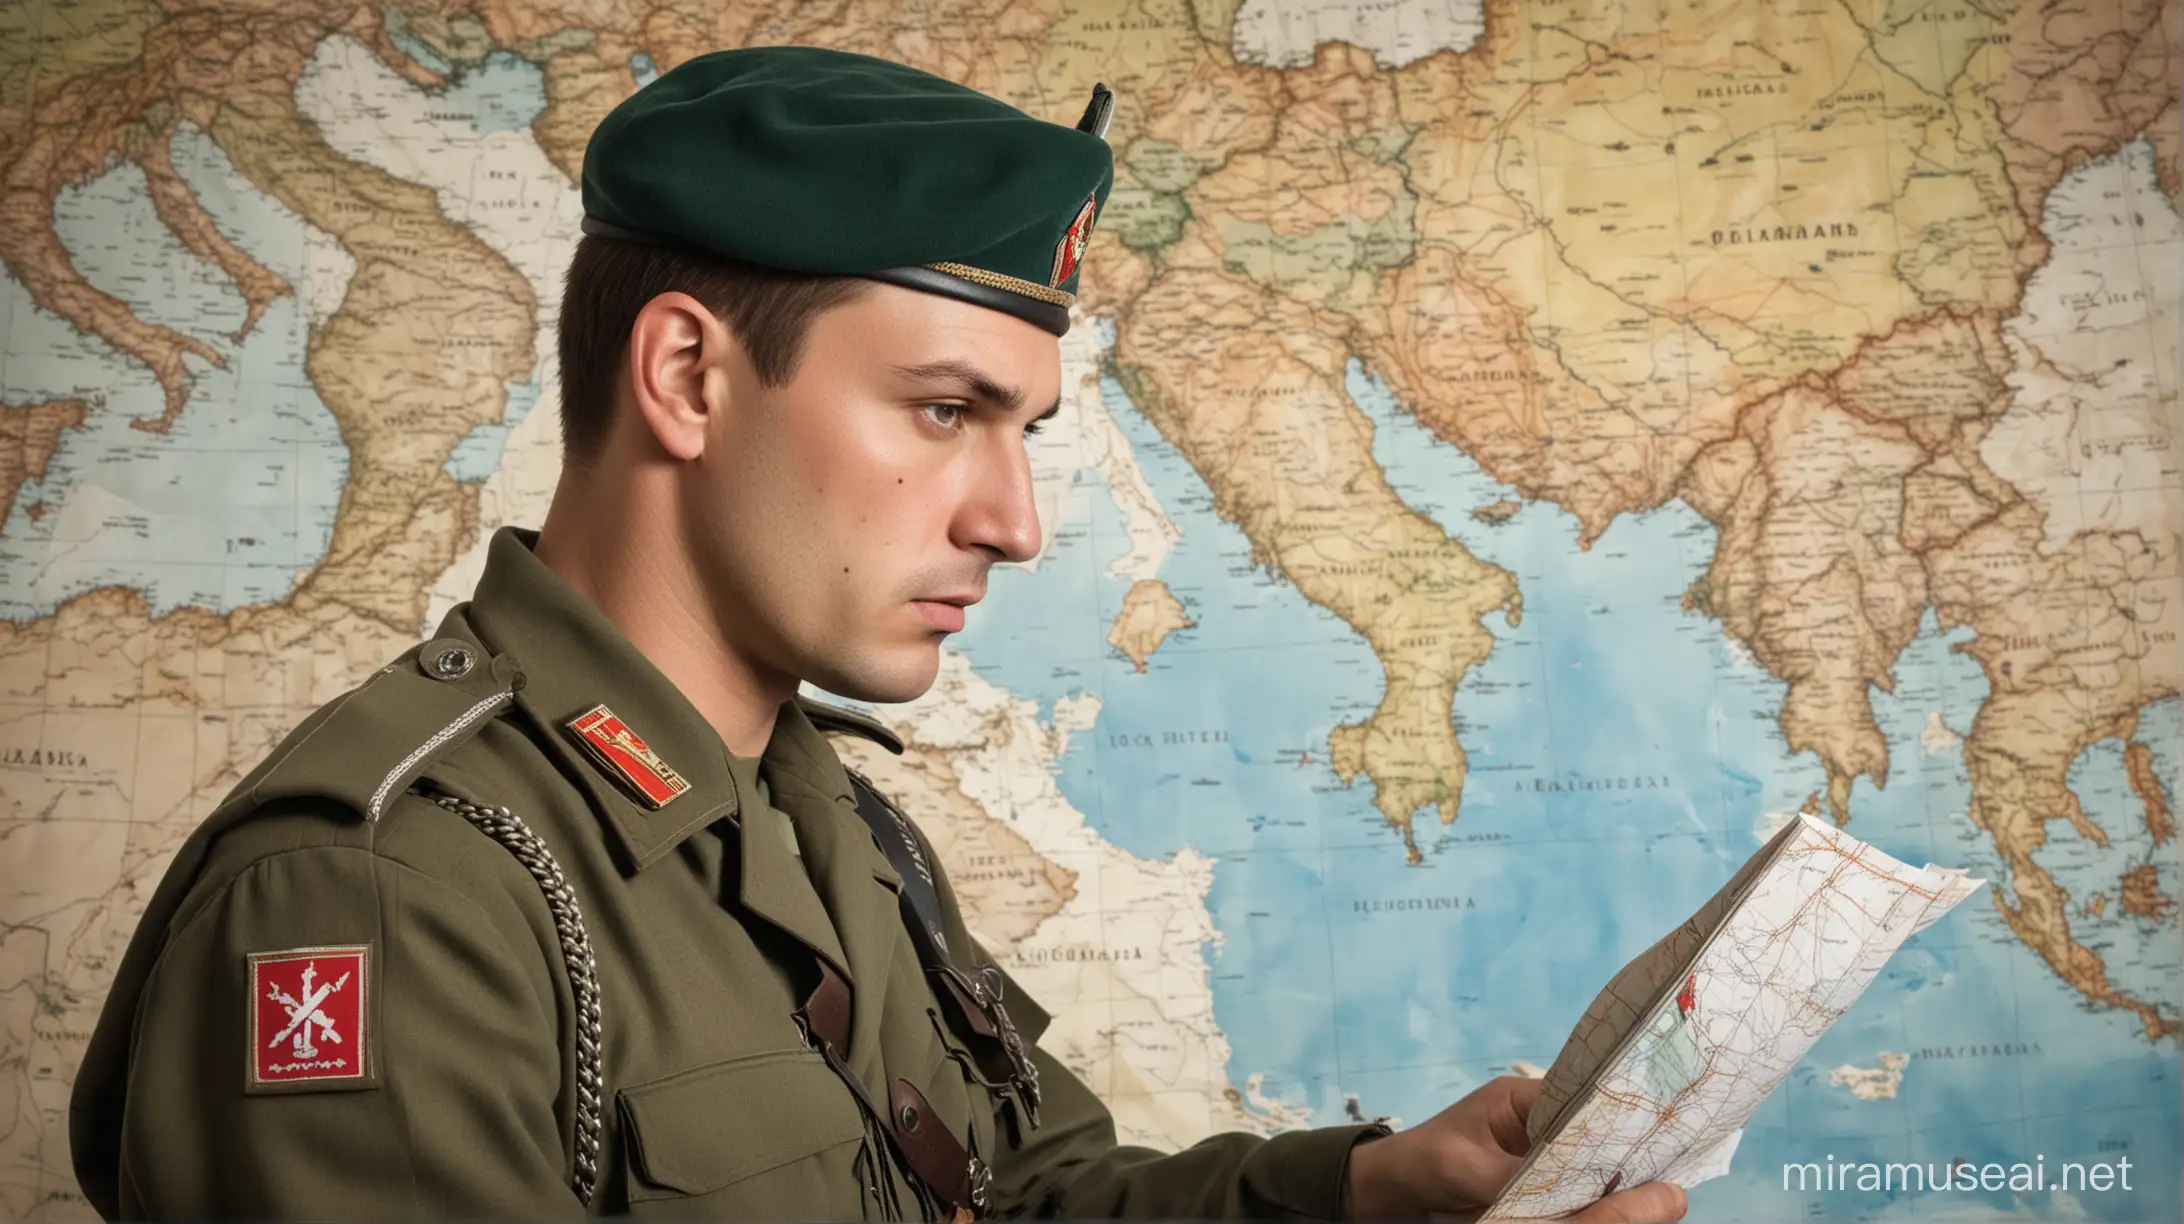 Russian soldier, dressed as a military man, he is looking at a map with Greece, Albania and the Balkans, 21st century, profile.